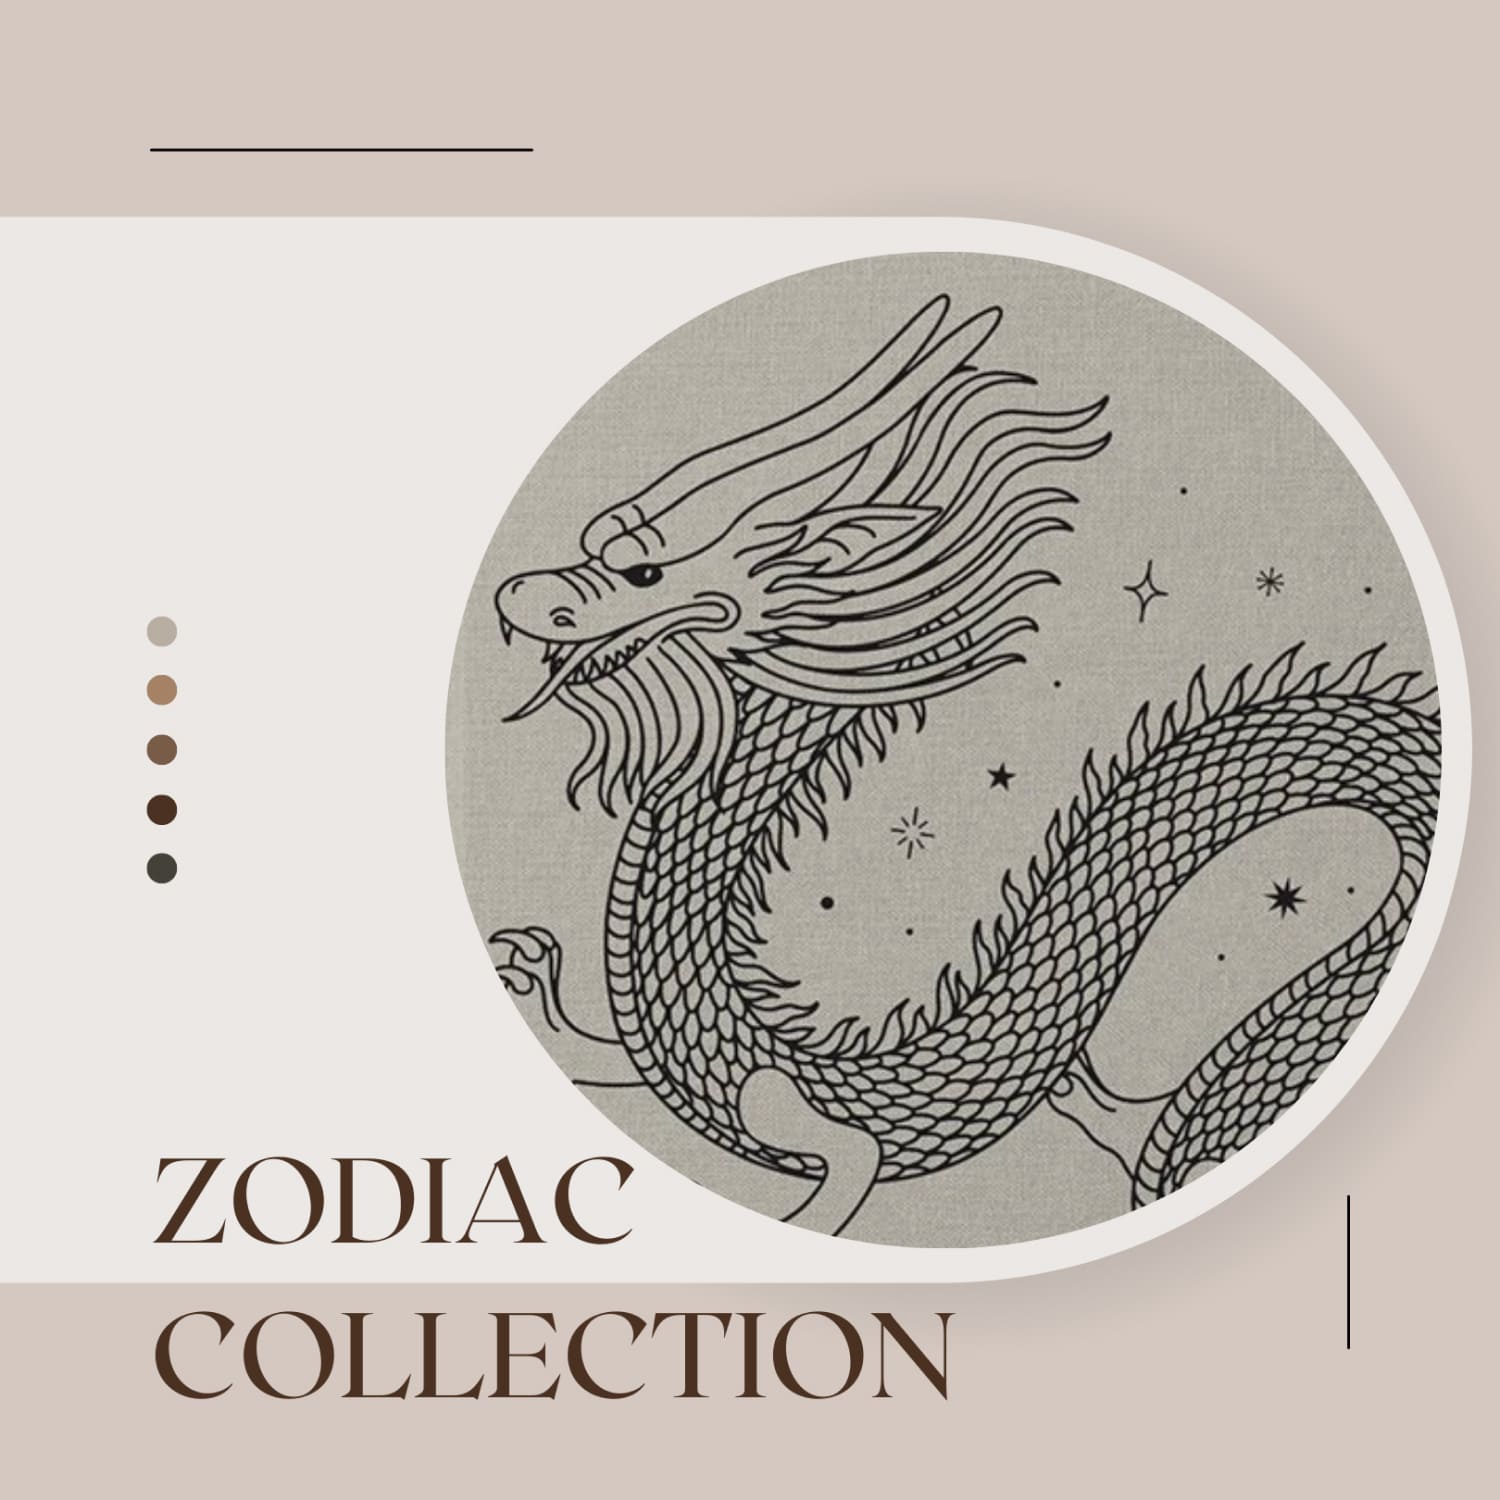 Zodiac collection, first picture 1500x1500.